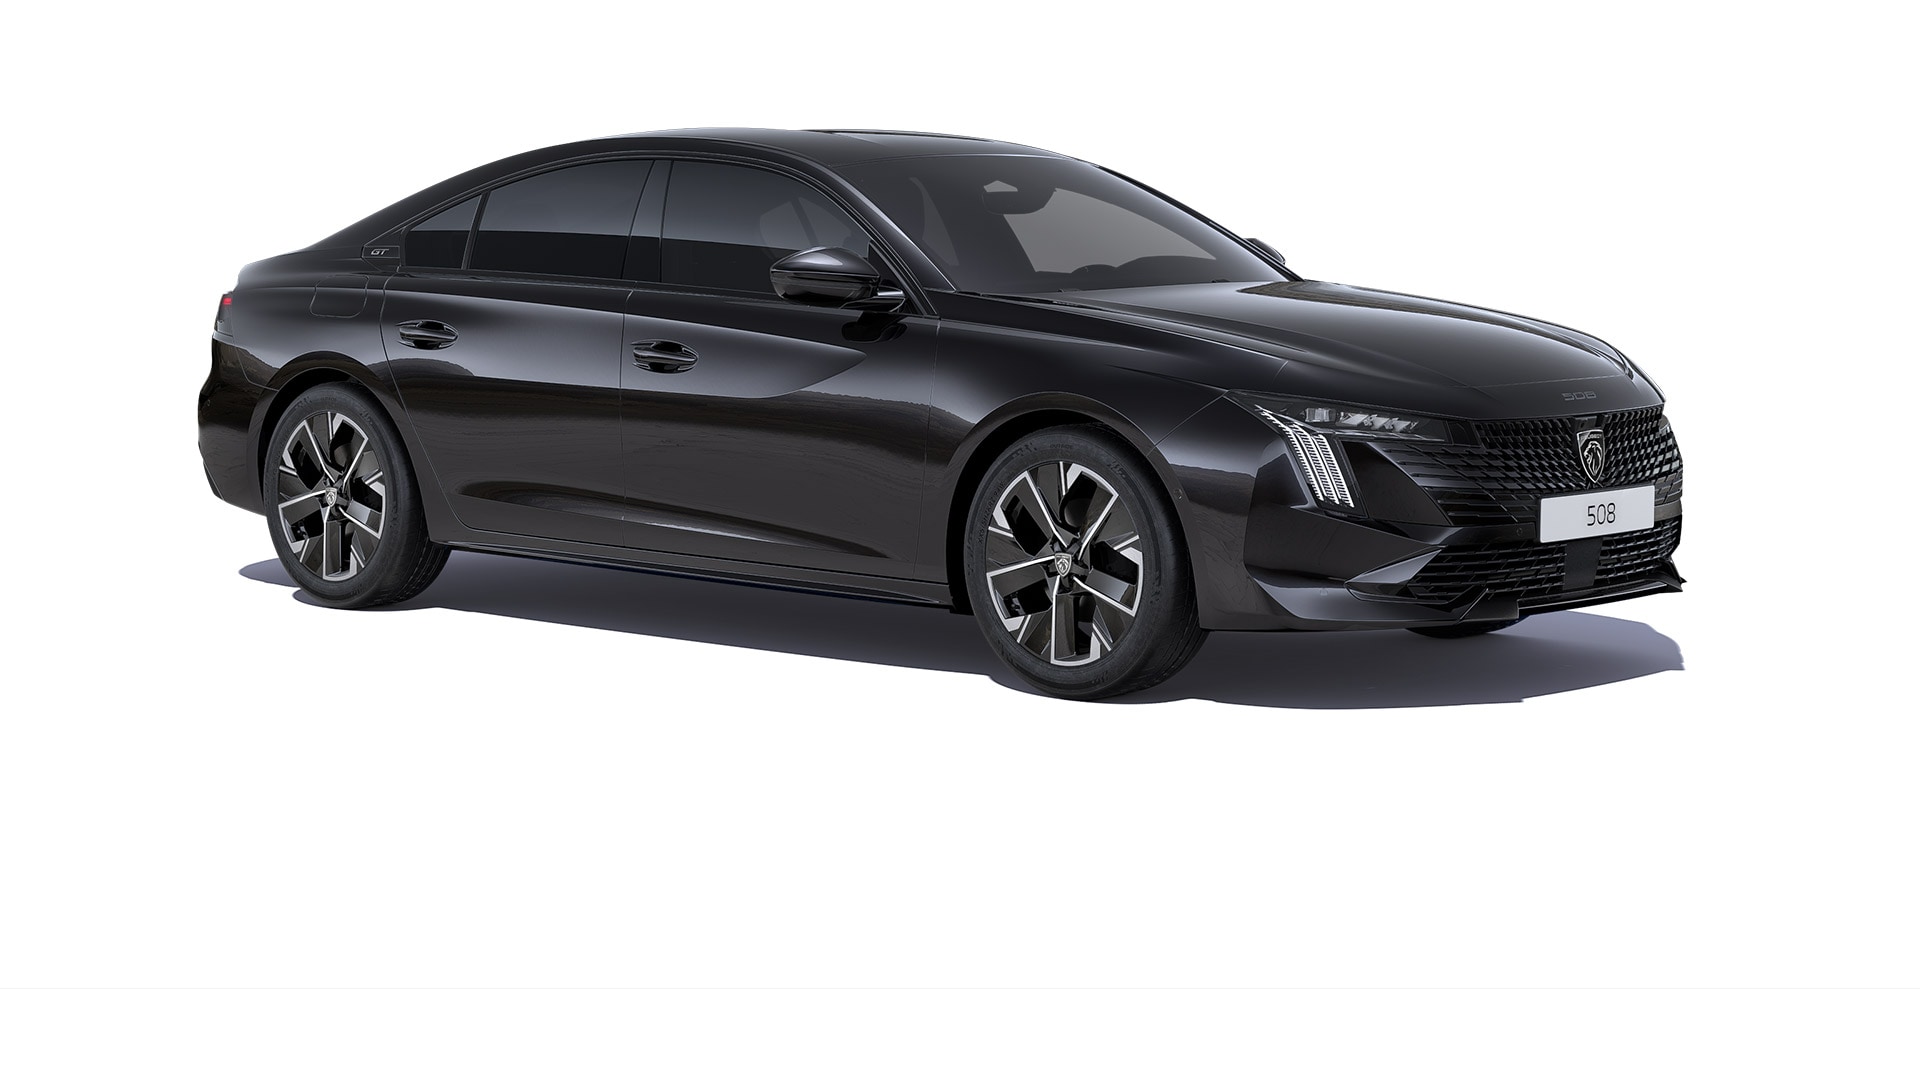 PEUGEOT 508 Fastback: A Fusion of Style & Tech